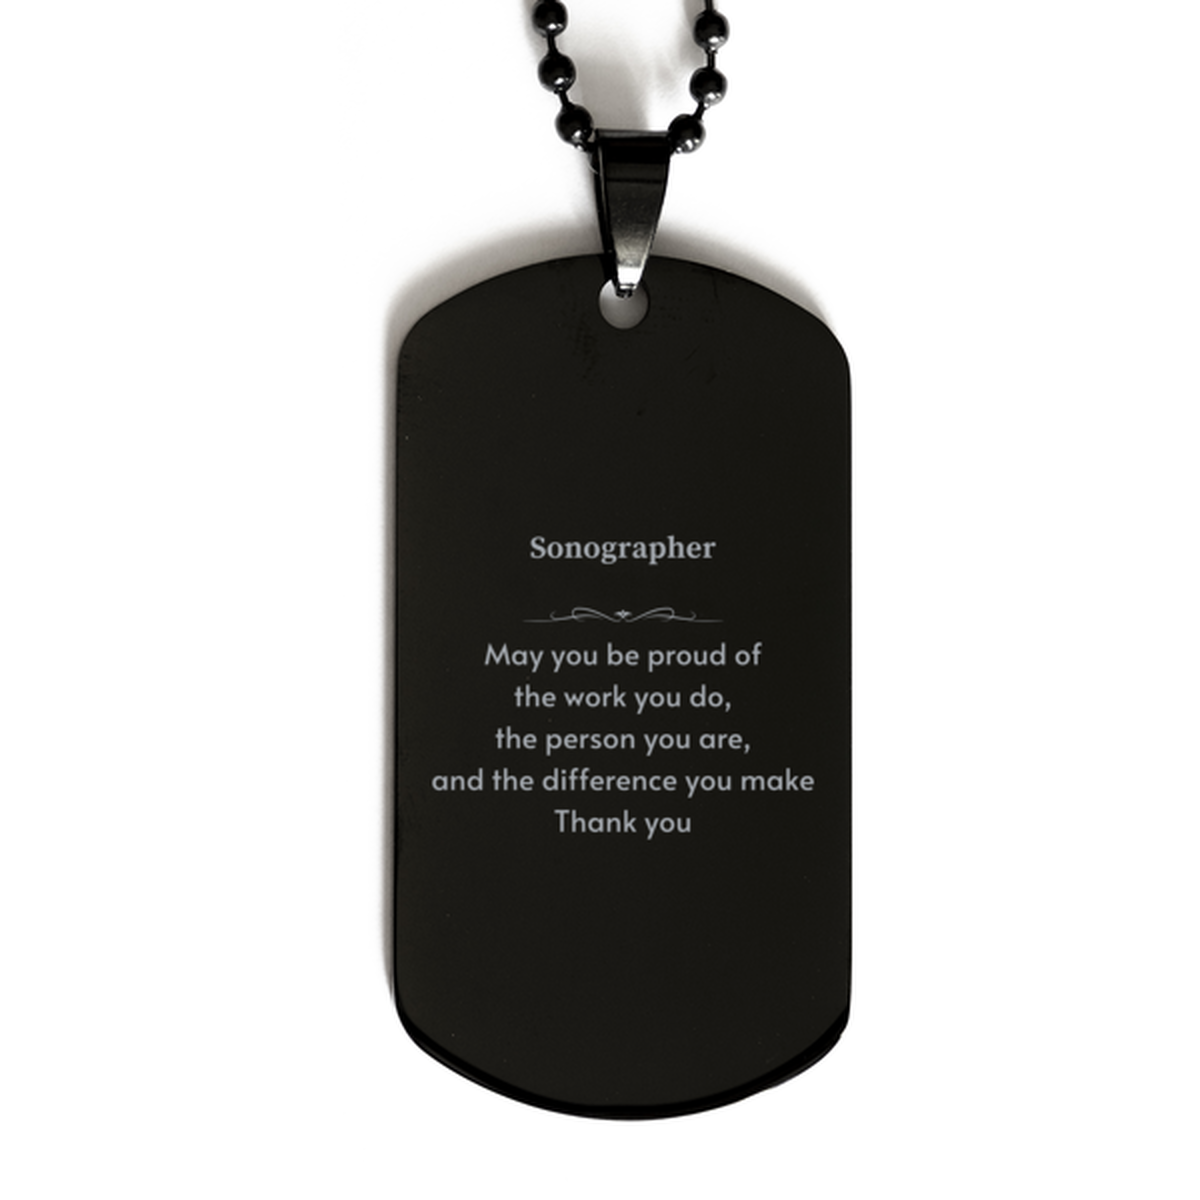 Heartwarming Black Dog Tag Retirement Coworkers Gifts for Sonographer, Sonographer May You be proud of the work you do, the person you are Gifts for Boss Men Women Friends